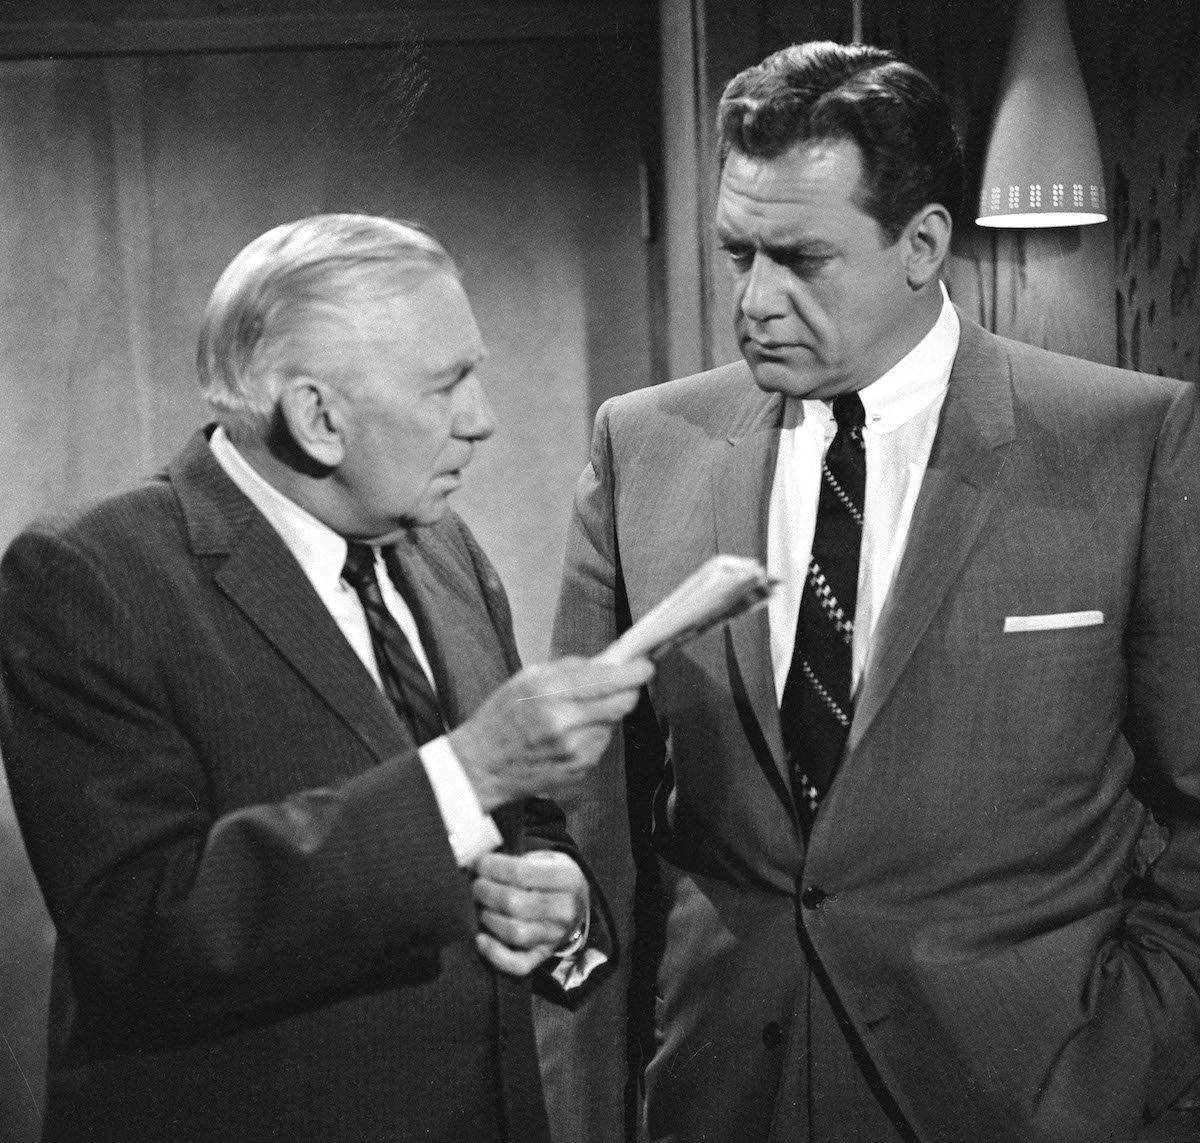 Black and white image of 'Perry Mason' cast members Ray Collins and Raymond Burr 